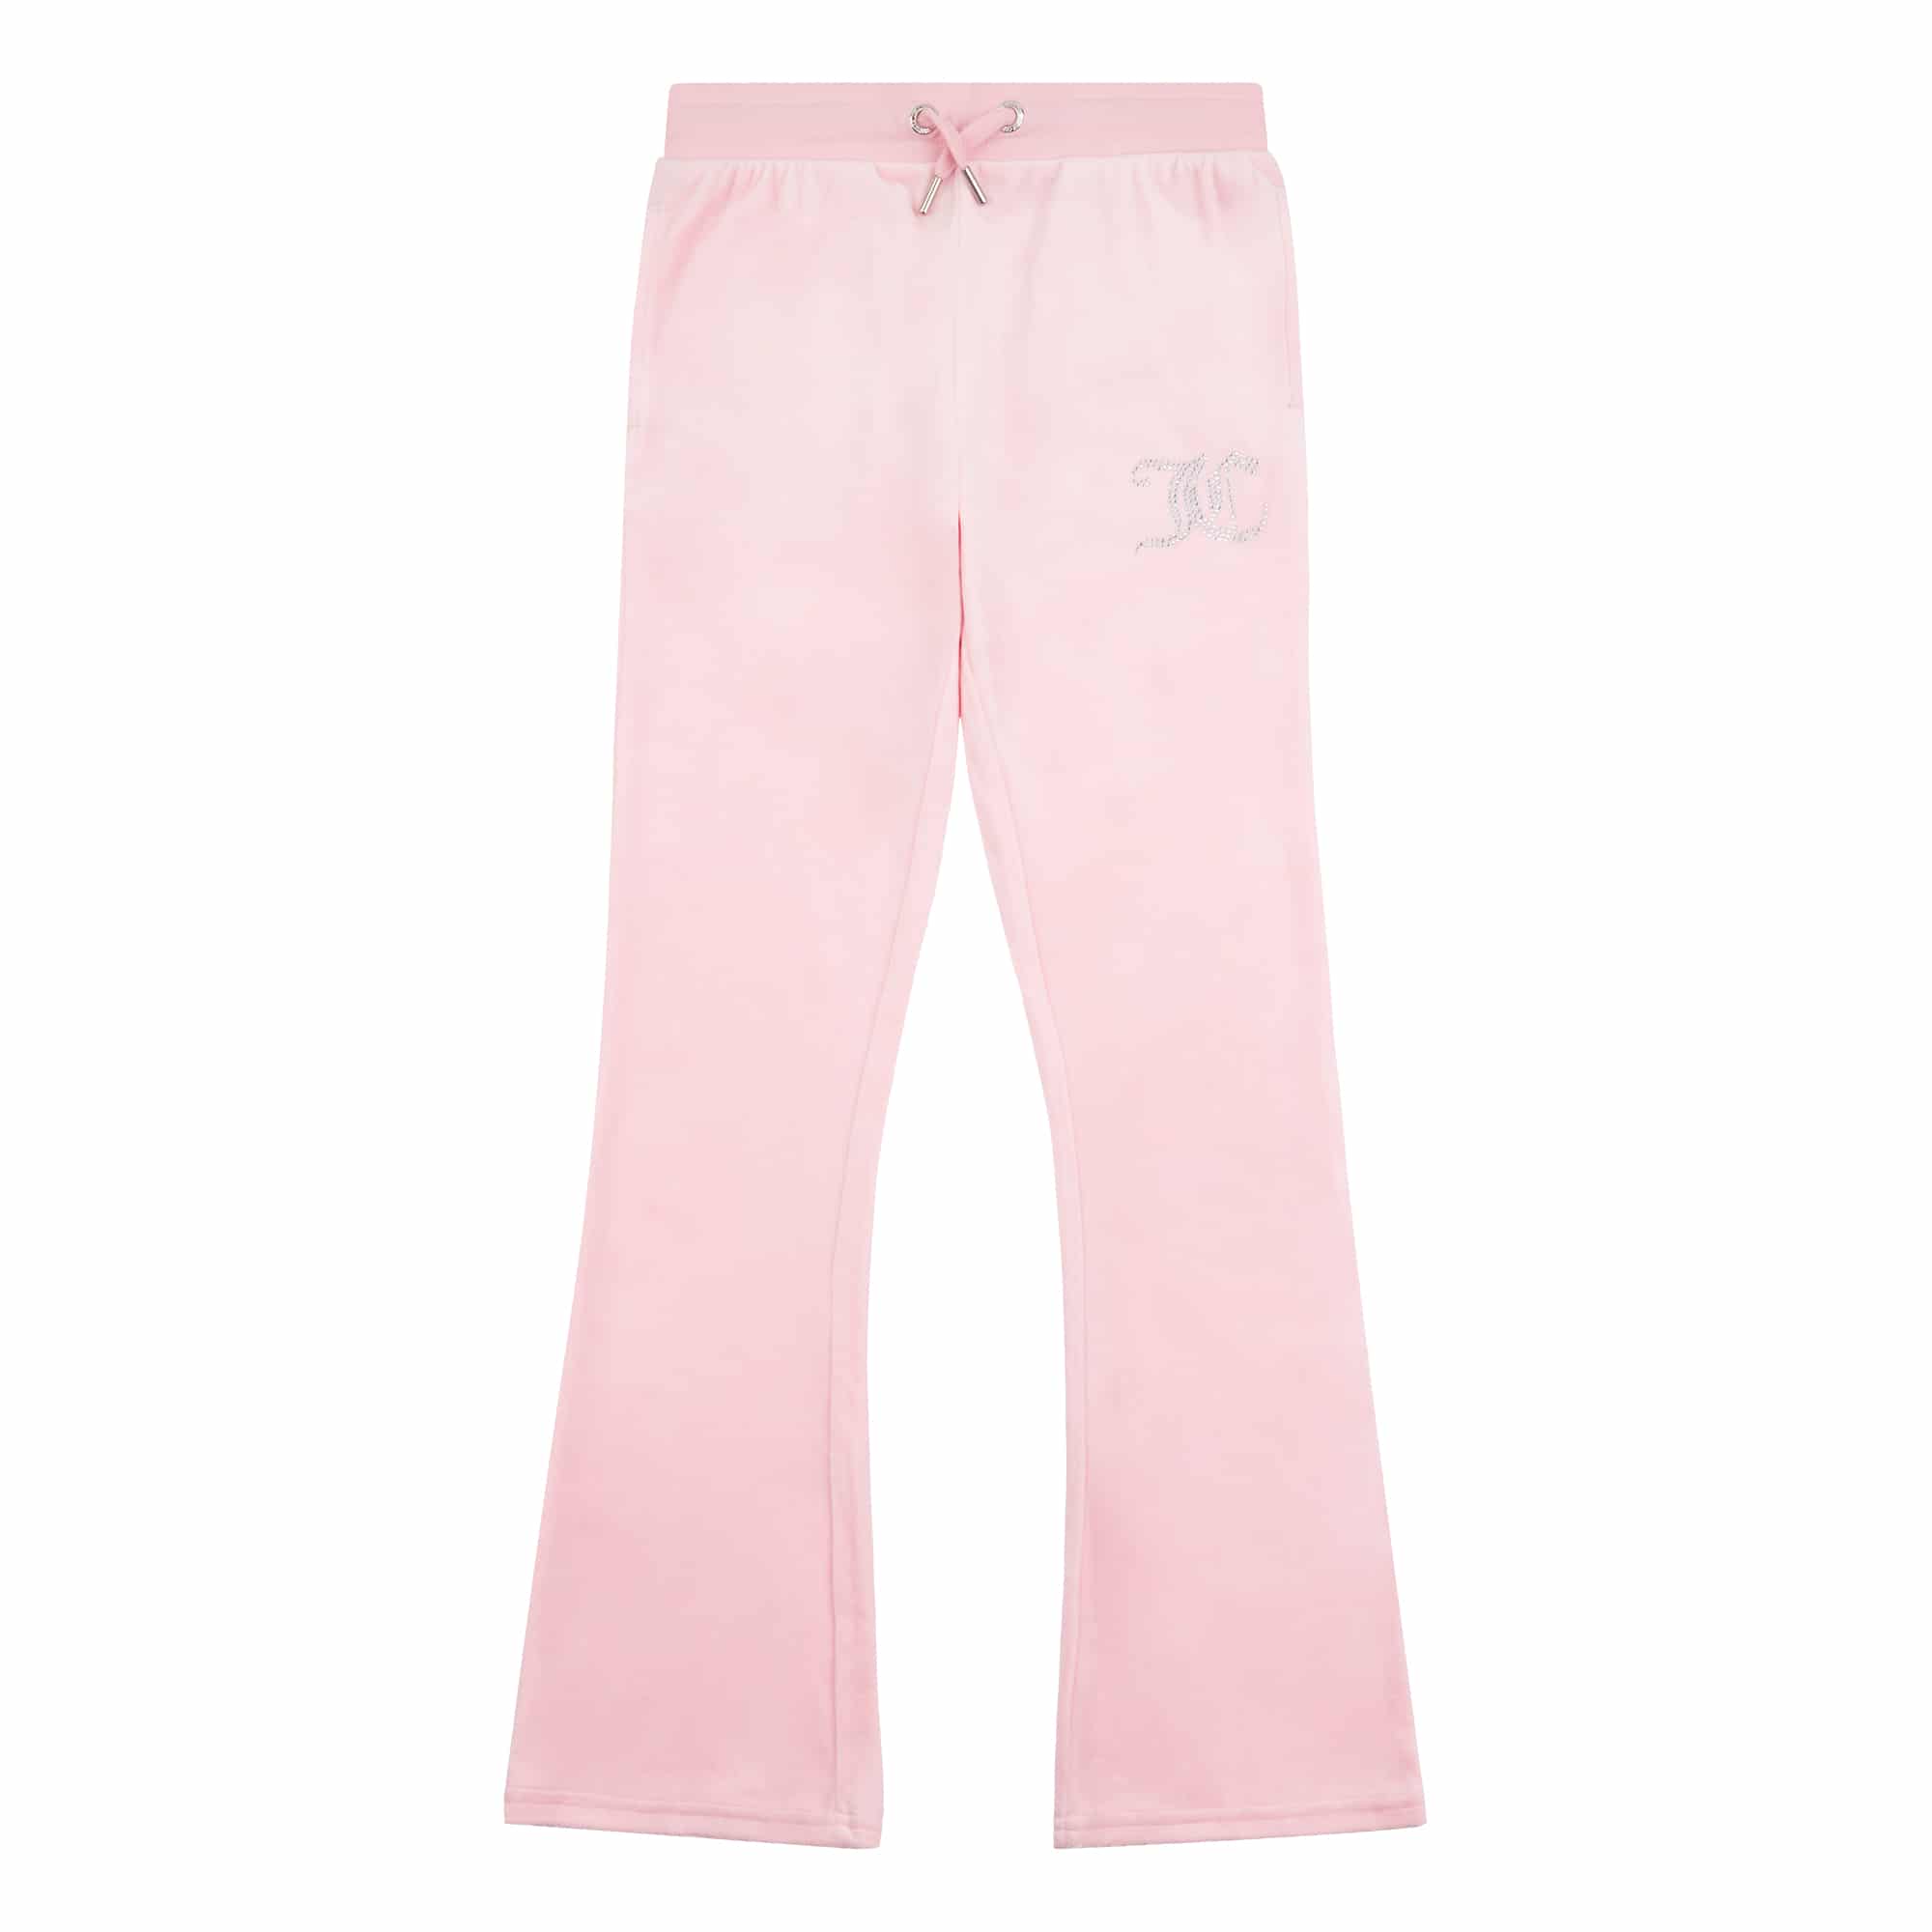 Juicy Couture girls pale pink velour tracksuit bottoms